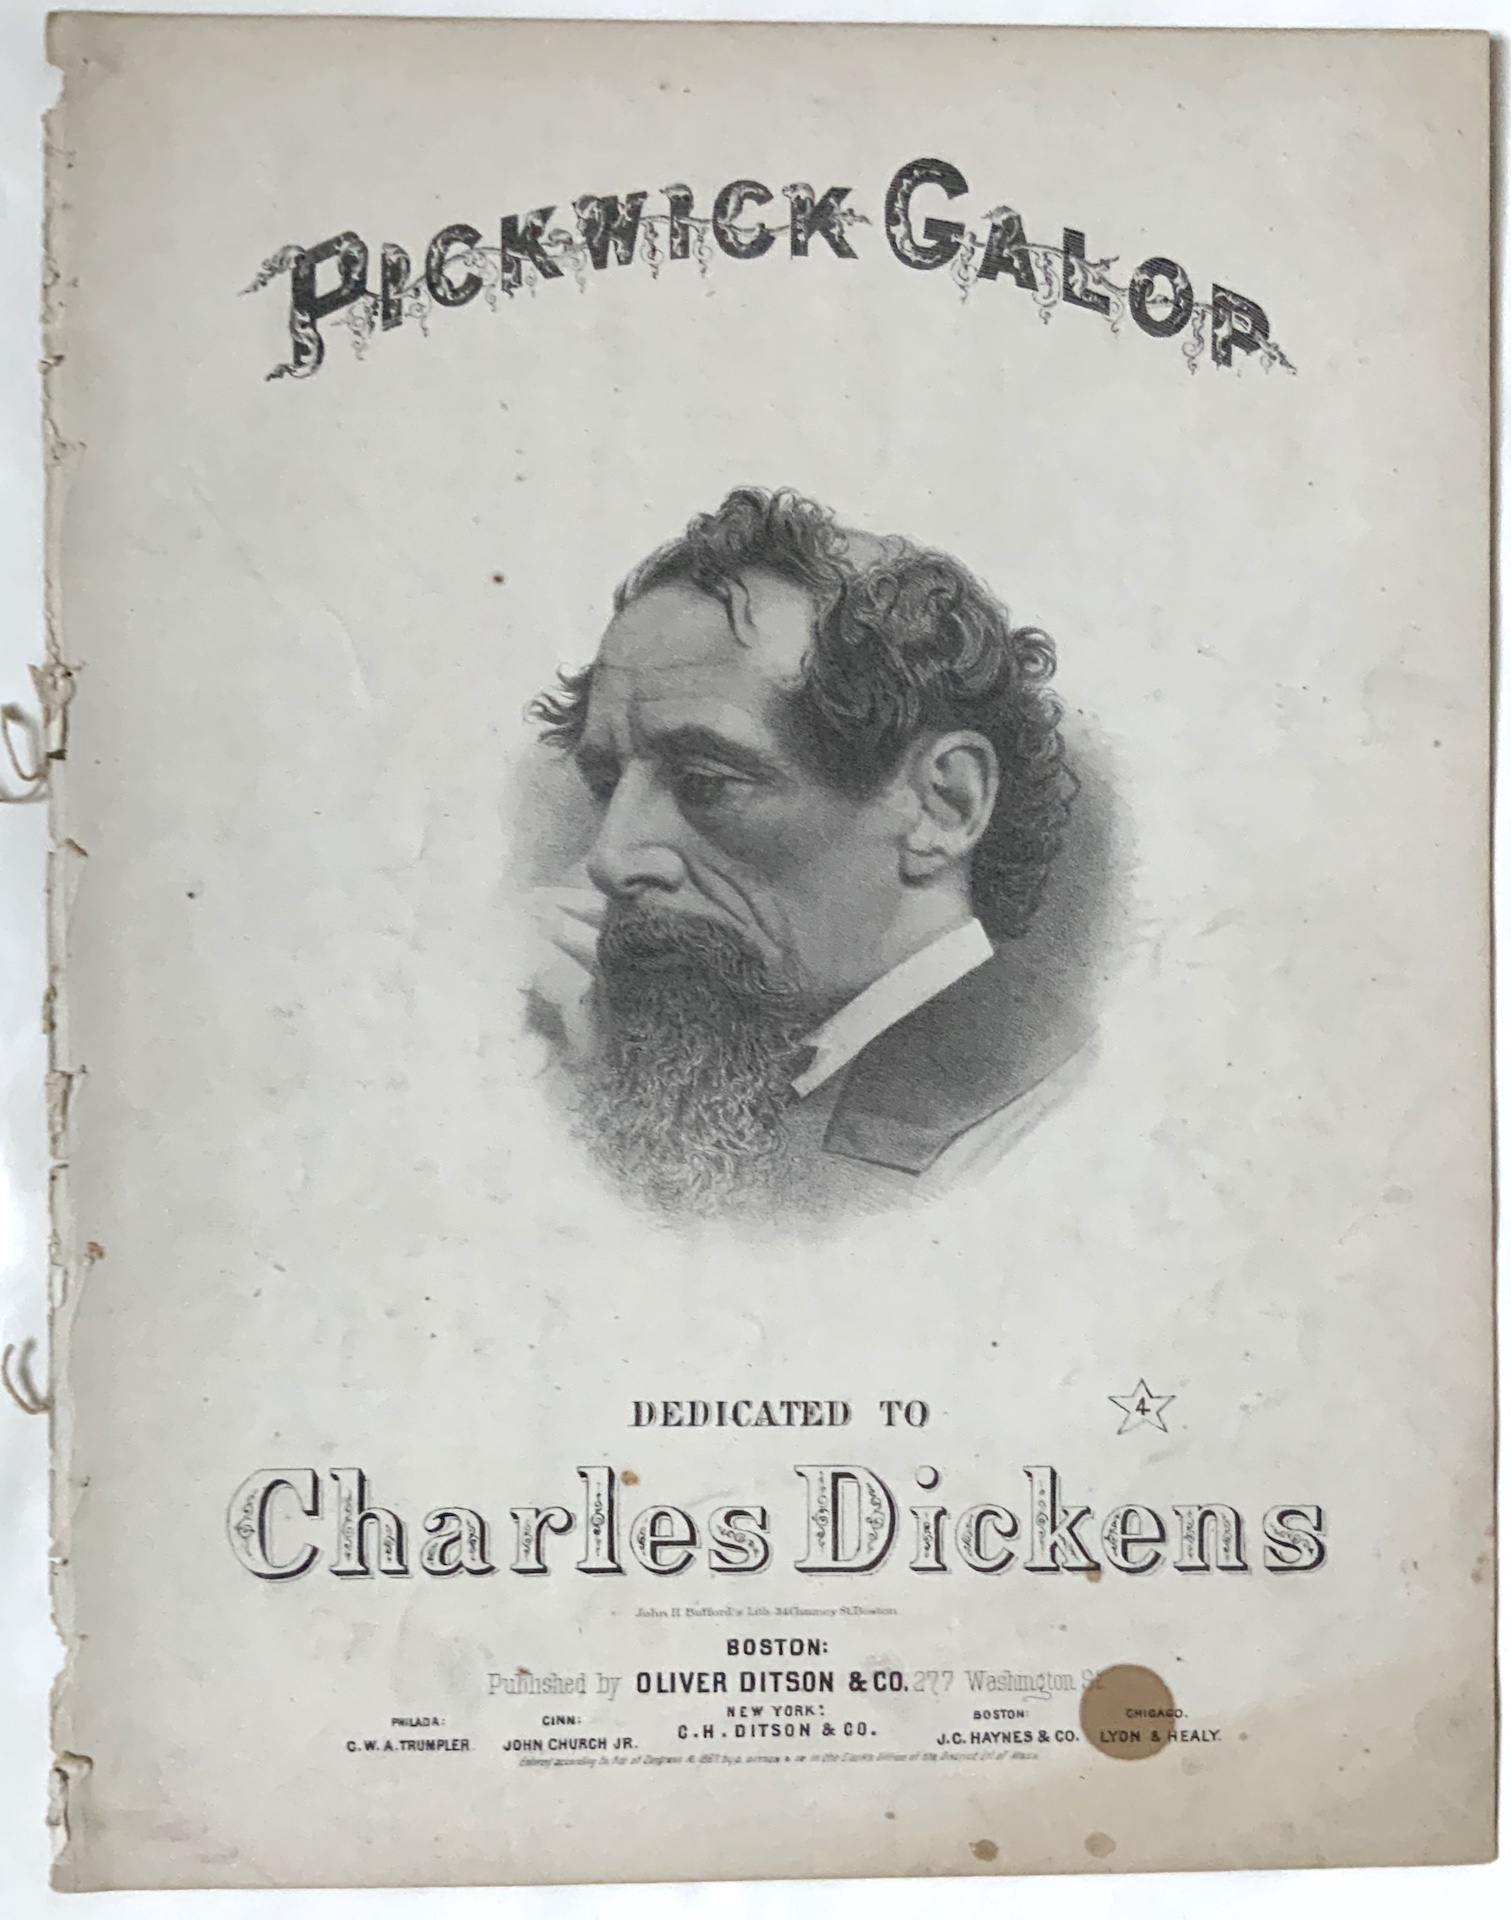 AK0305 PICKWICK GALOP - DEDICATED TO CHARLES DICKENS